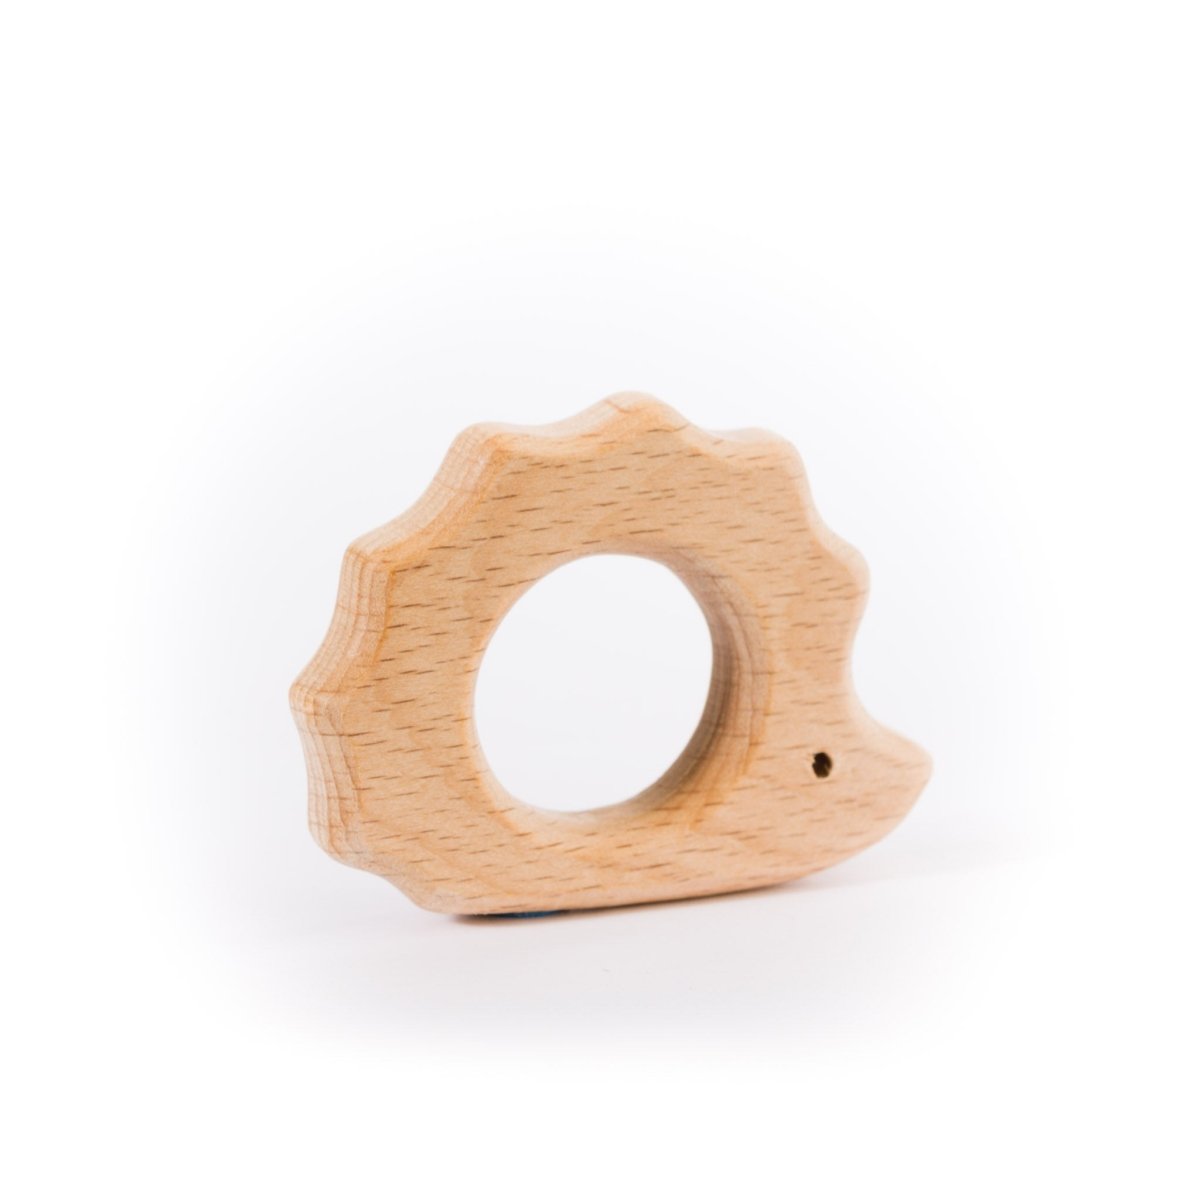 Wood Rings & Pendants Small - Beech Wood Hedgehog from Cara & Co Craft Supply